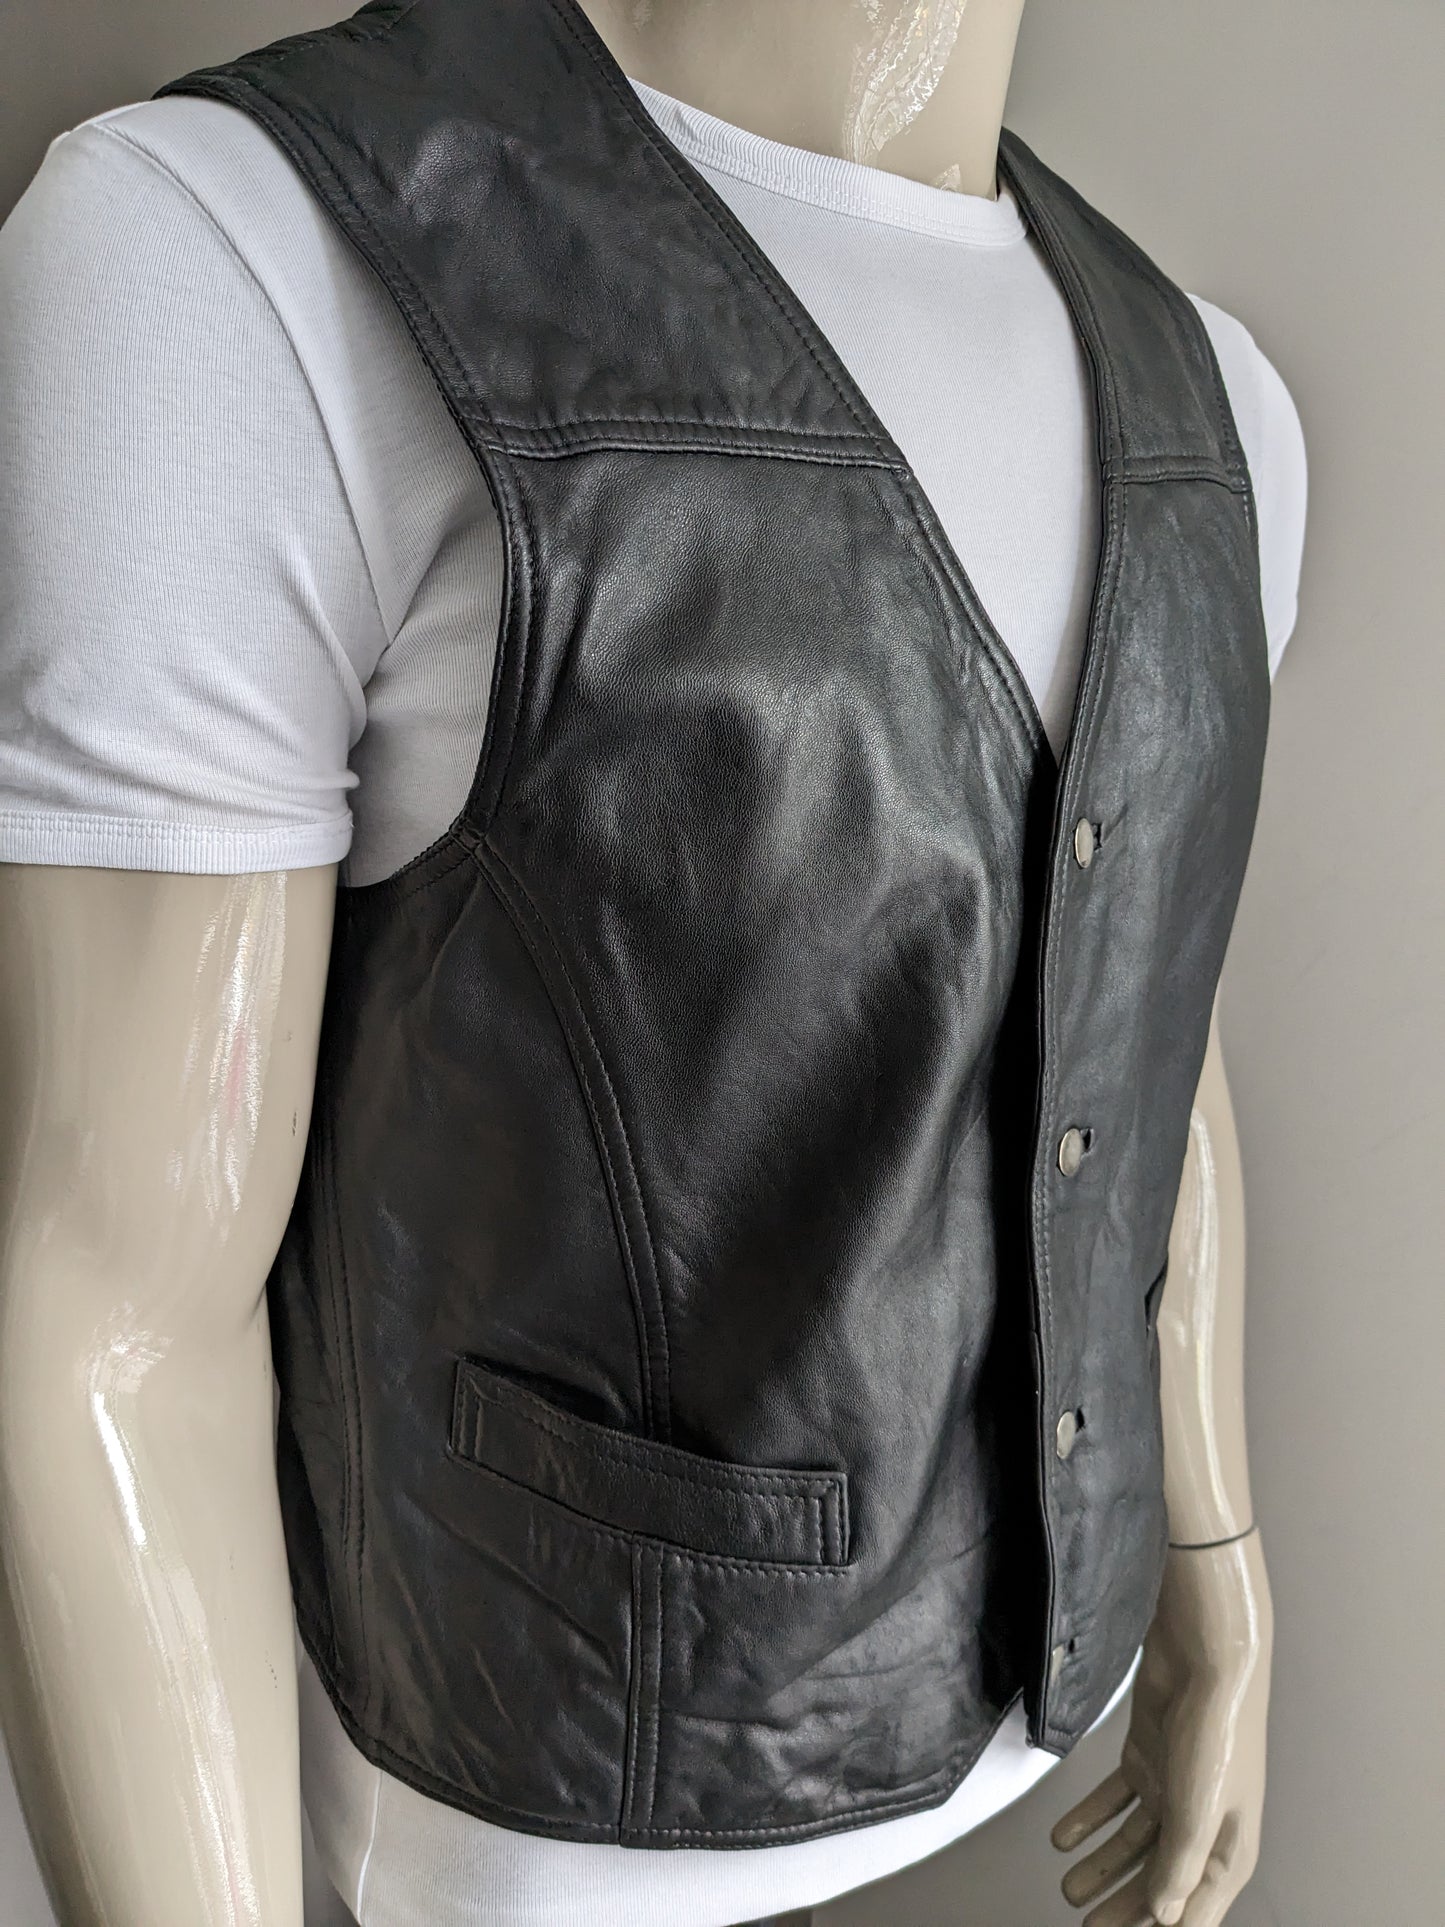 Vintage leather waistcoat with press studs. Double -sided leather. Black colored. Size M. #316.